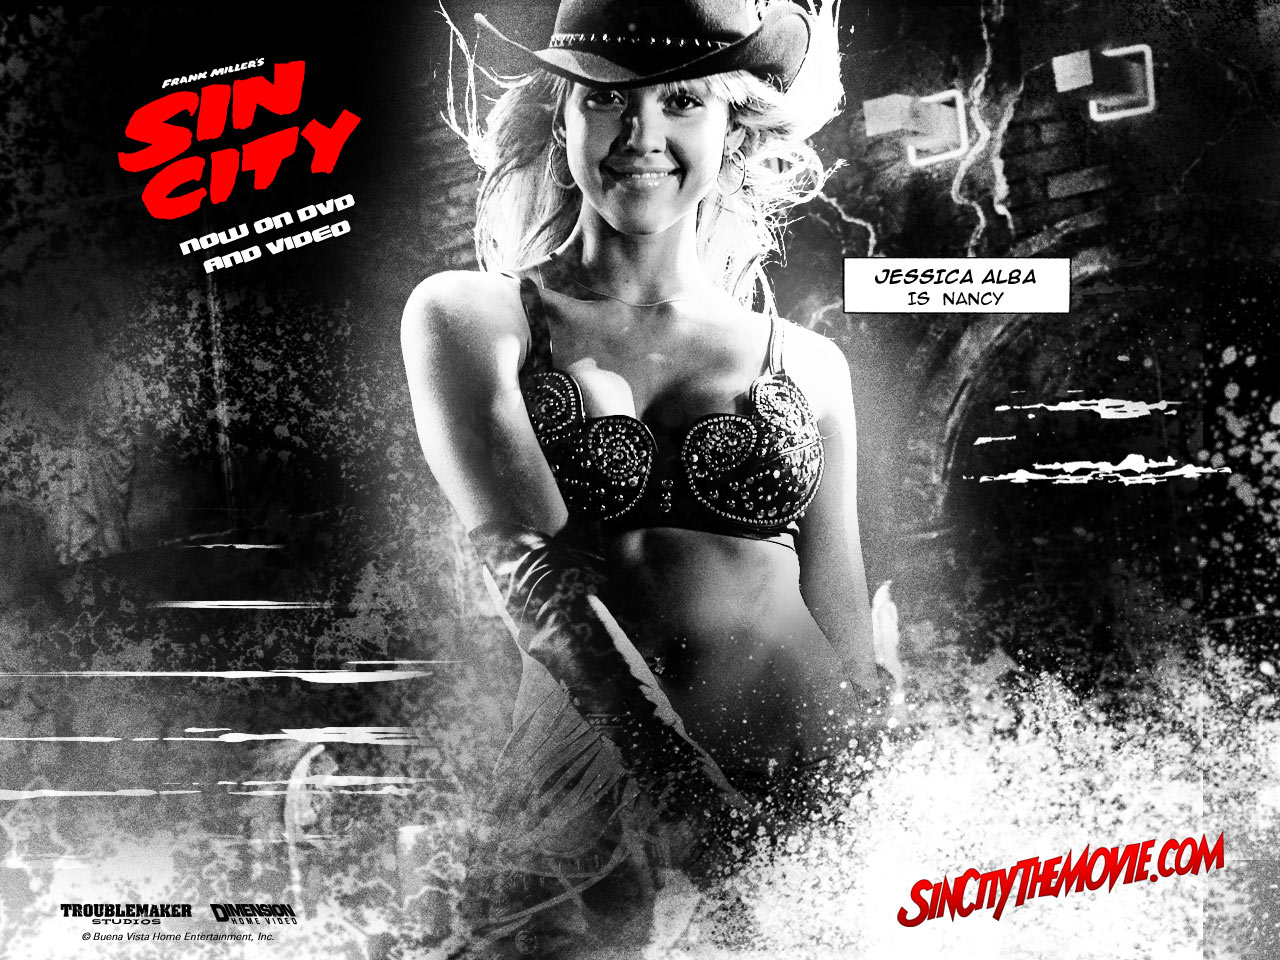 Download High quality Sin City wallpaper / Movies / 1280x960